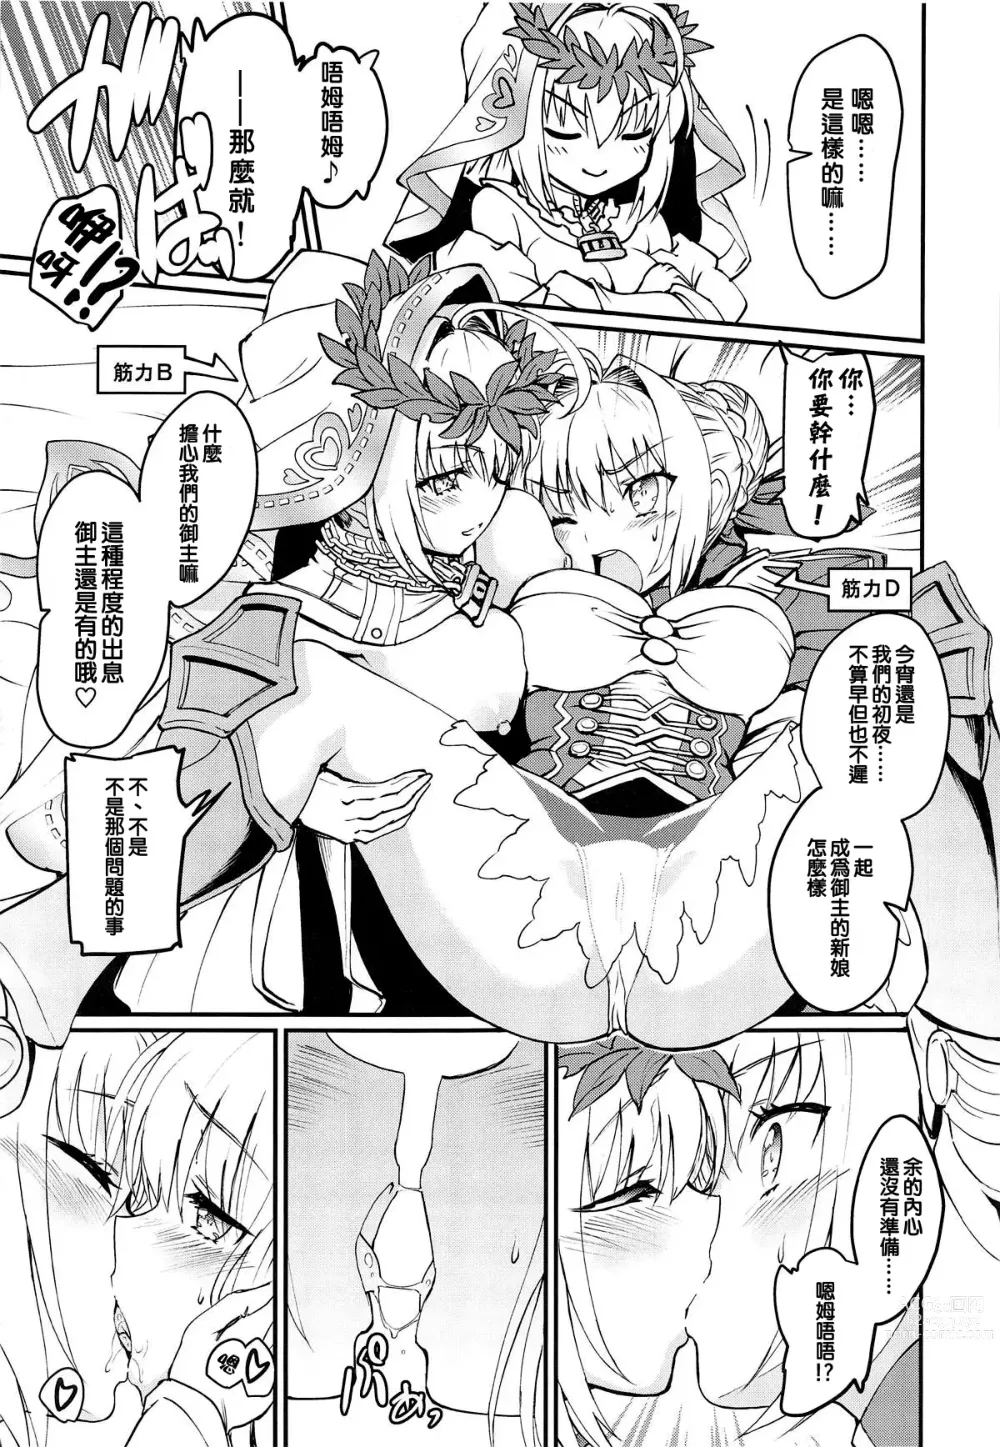 Page 26 of doujinshi 尼禄+尼禄!